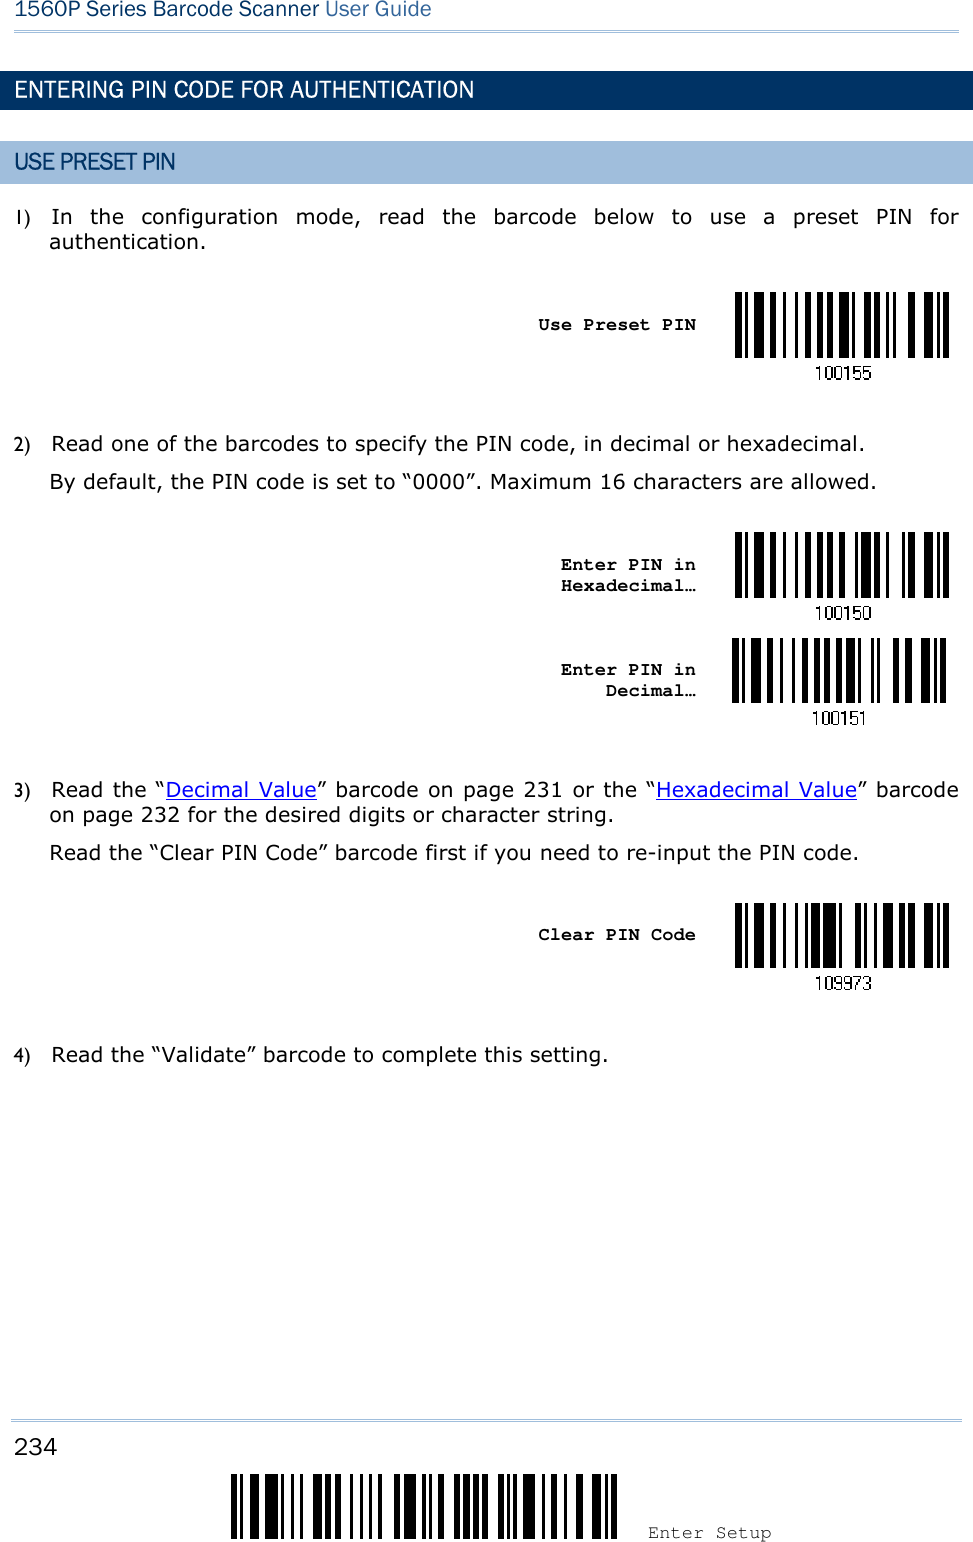 234 Enter Setup 1560P Series Barcode Scanner User Guide ENTERING PIN CODE FOR AUTHENTICATION USE PRESET PIN 1) In  the  configuration  mode,  read  the  barcode  below  to  use  a  preset  PIN  forauthentication.Use Preset PIN 2) Read one of the barcodes to specify the PIN code, in decimal or hexadecimal.By default, the PIN code is set to “0000”. Maximum 16 characters are allowed.Enter PIN in Hexadecimal… Enter PIN in Decimal… 3) Read the “Decimal Value” barcode on page 231 or the “Hexadecimal Value” barcodeon page 232 for the desired digits or character string.Read the “Clear PIN Code” barcode first if you need to re-input the PIN code.Clear PIN Code 4) Read the “Validate” barcode to complete this setting.